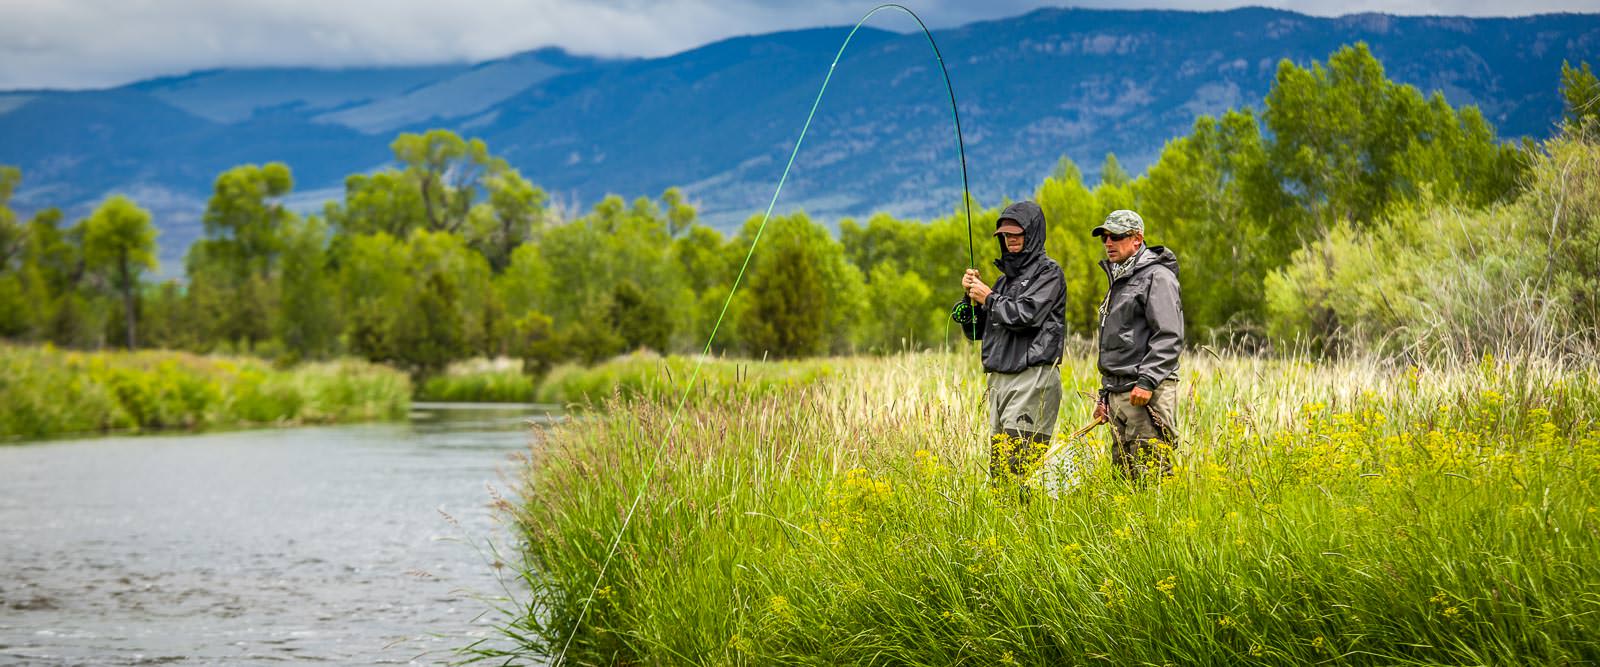 Montana Fly Fishing Guides and Trips